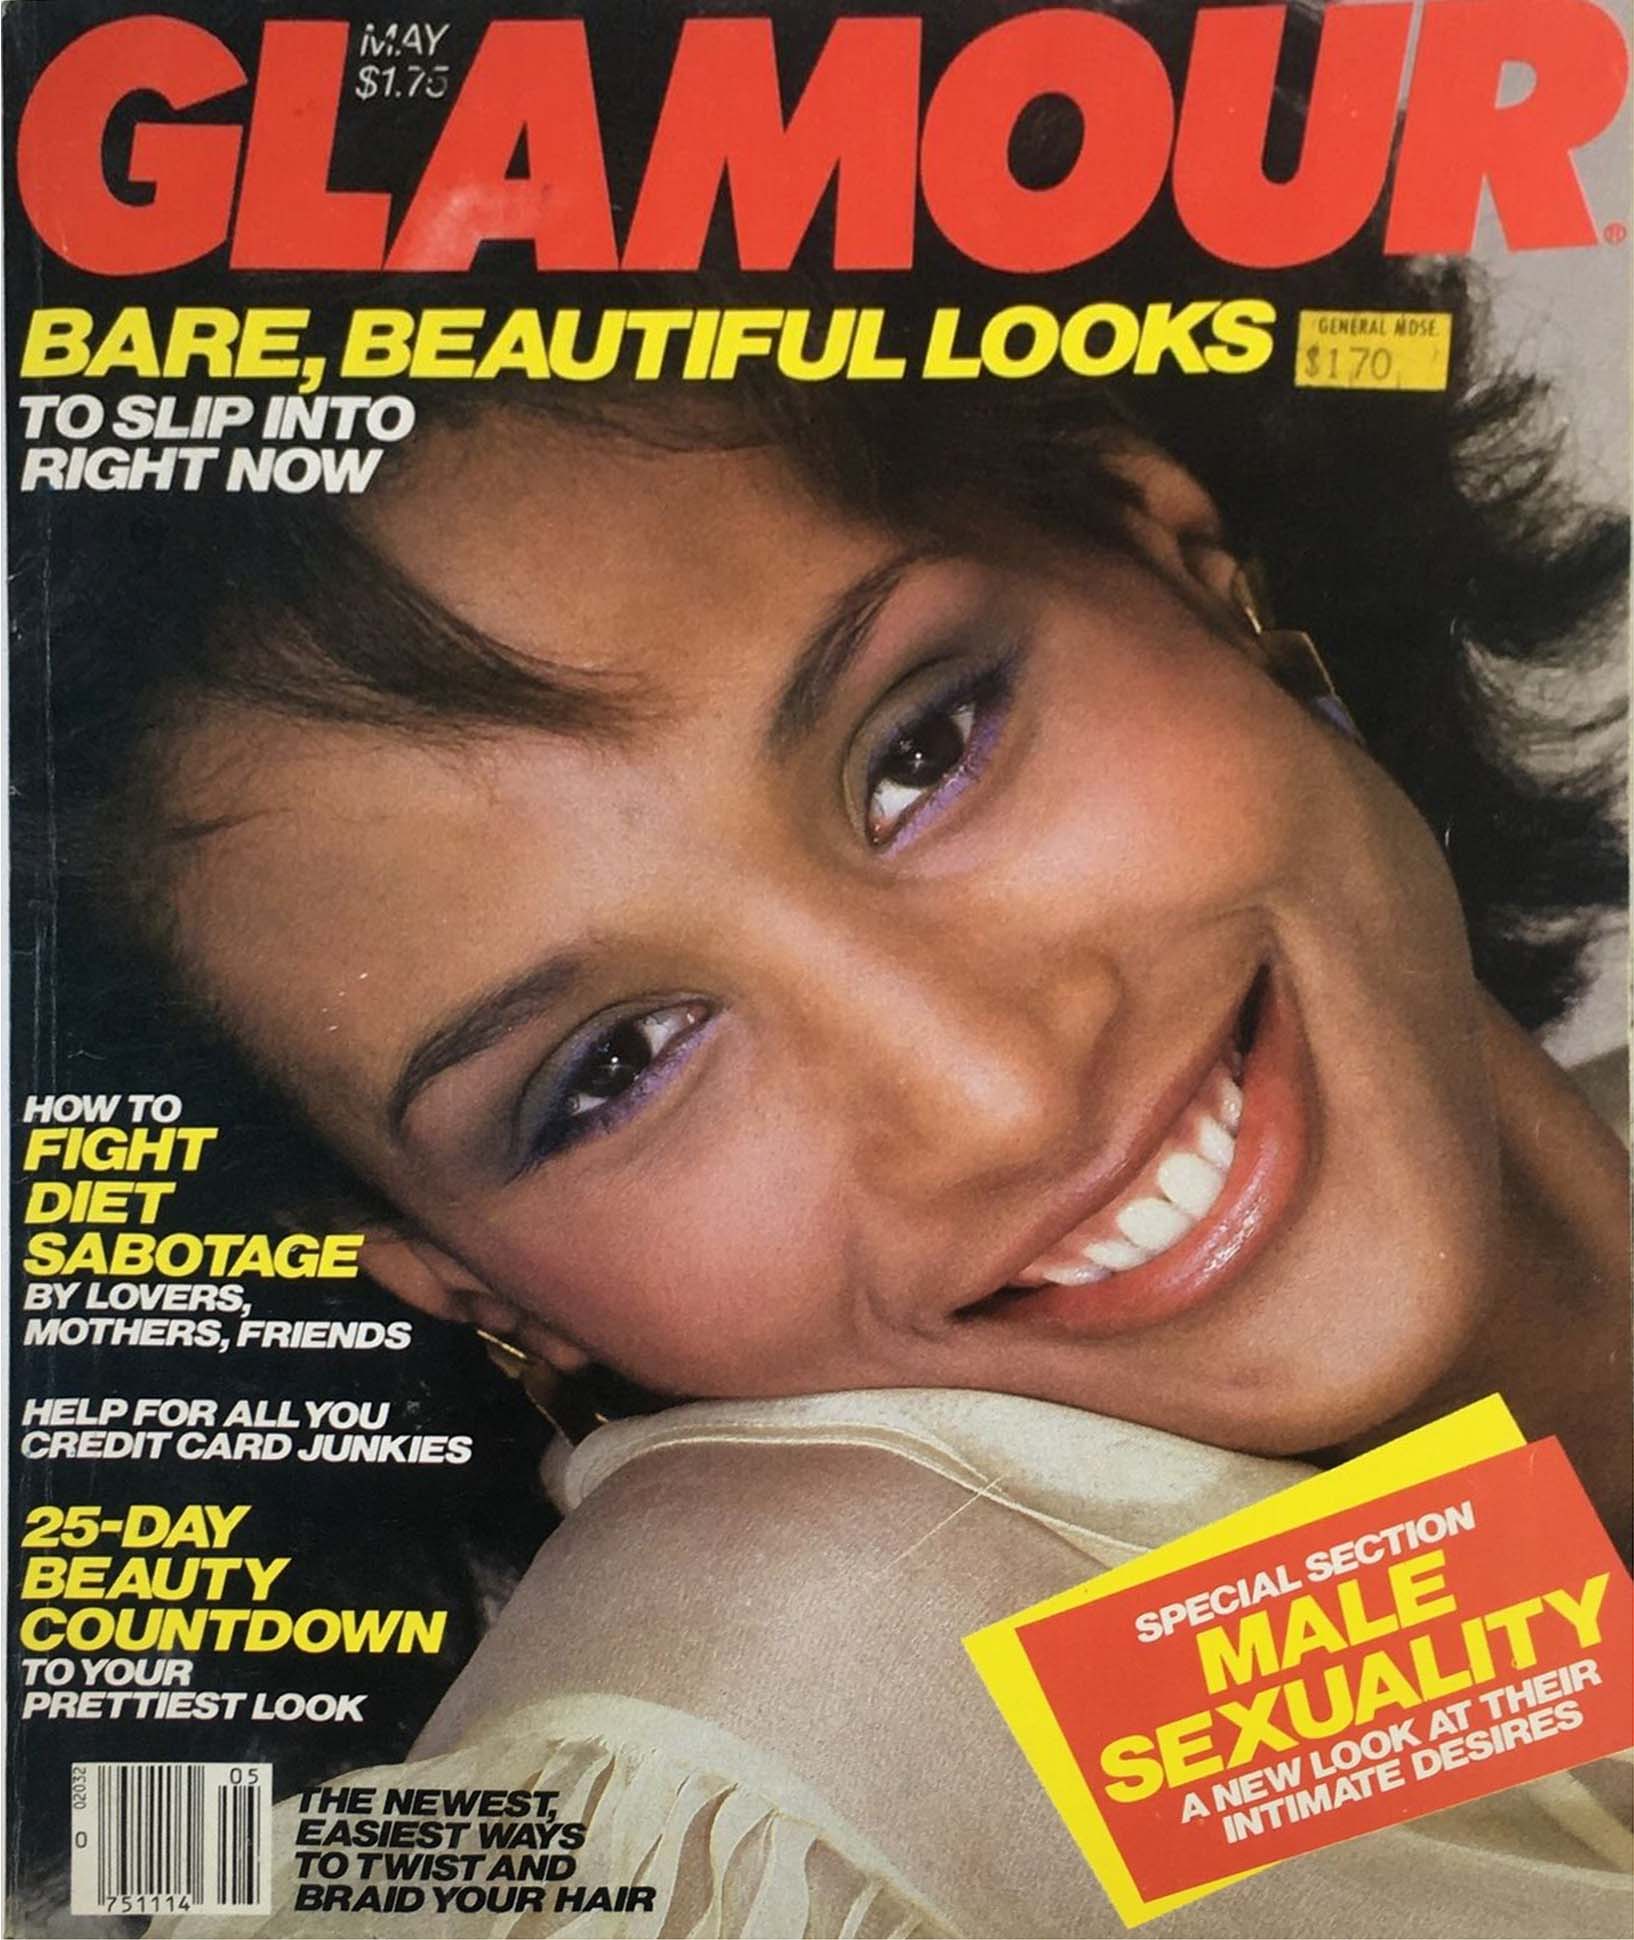 Glamour May 1981 magazine back issue Glamour magizine back copy Glamour May 1981 Womens Magazine Back Issue Published by Conde Nast Publications. Bare, Beautiful Looks To Slip Into Right Now.